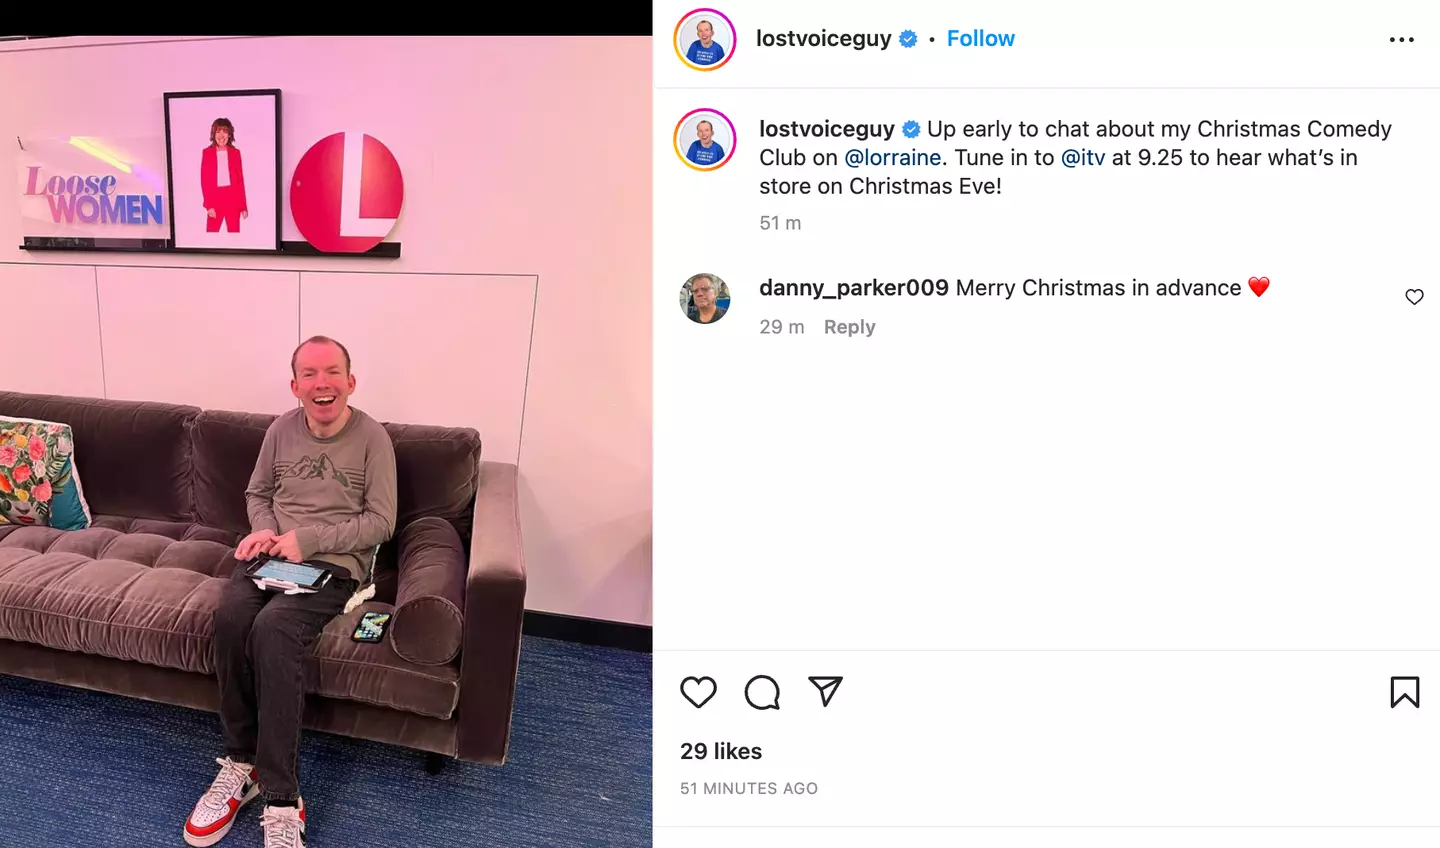 Lost Voice Guy is set to appear in a Christmas special show on Christmas Eve.